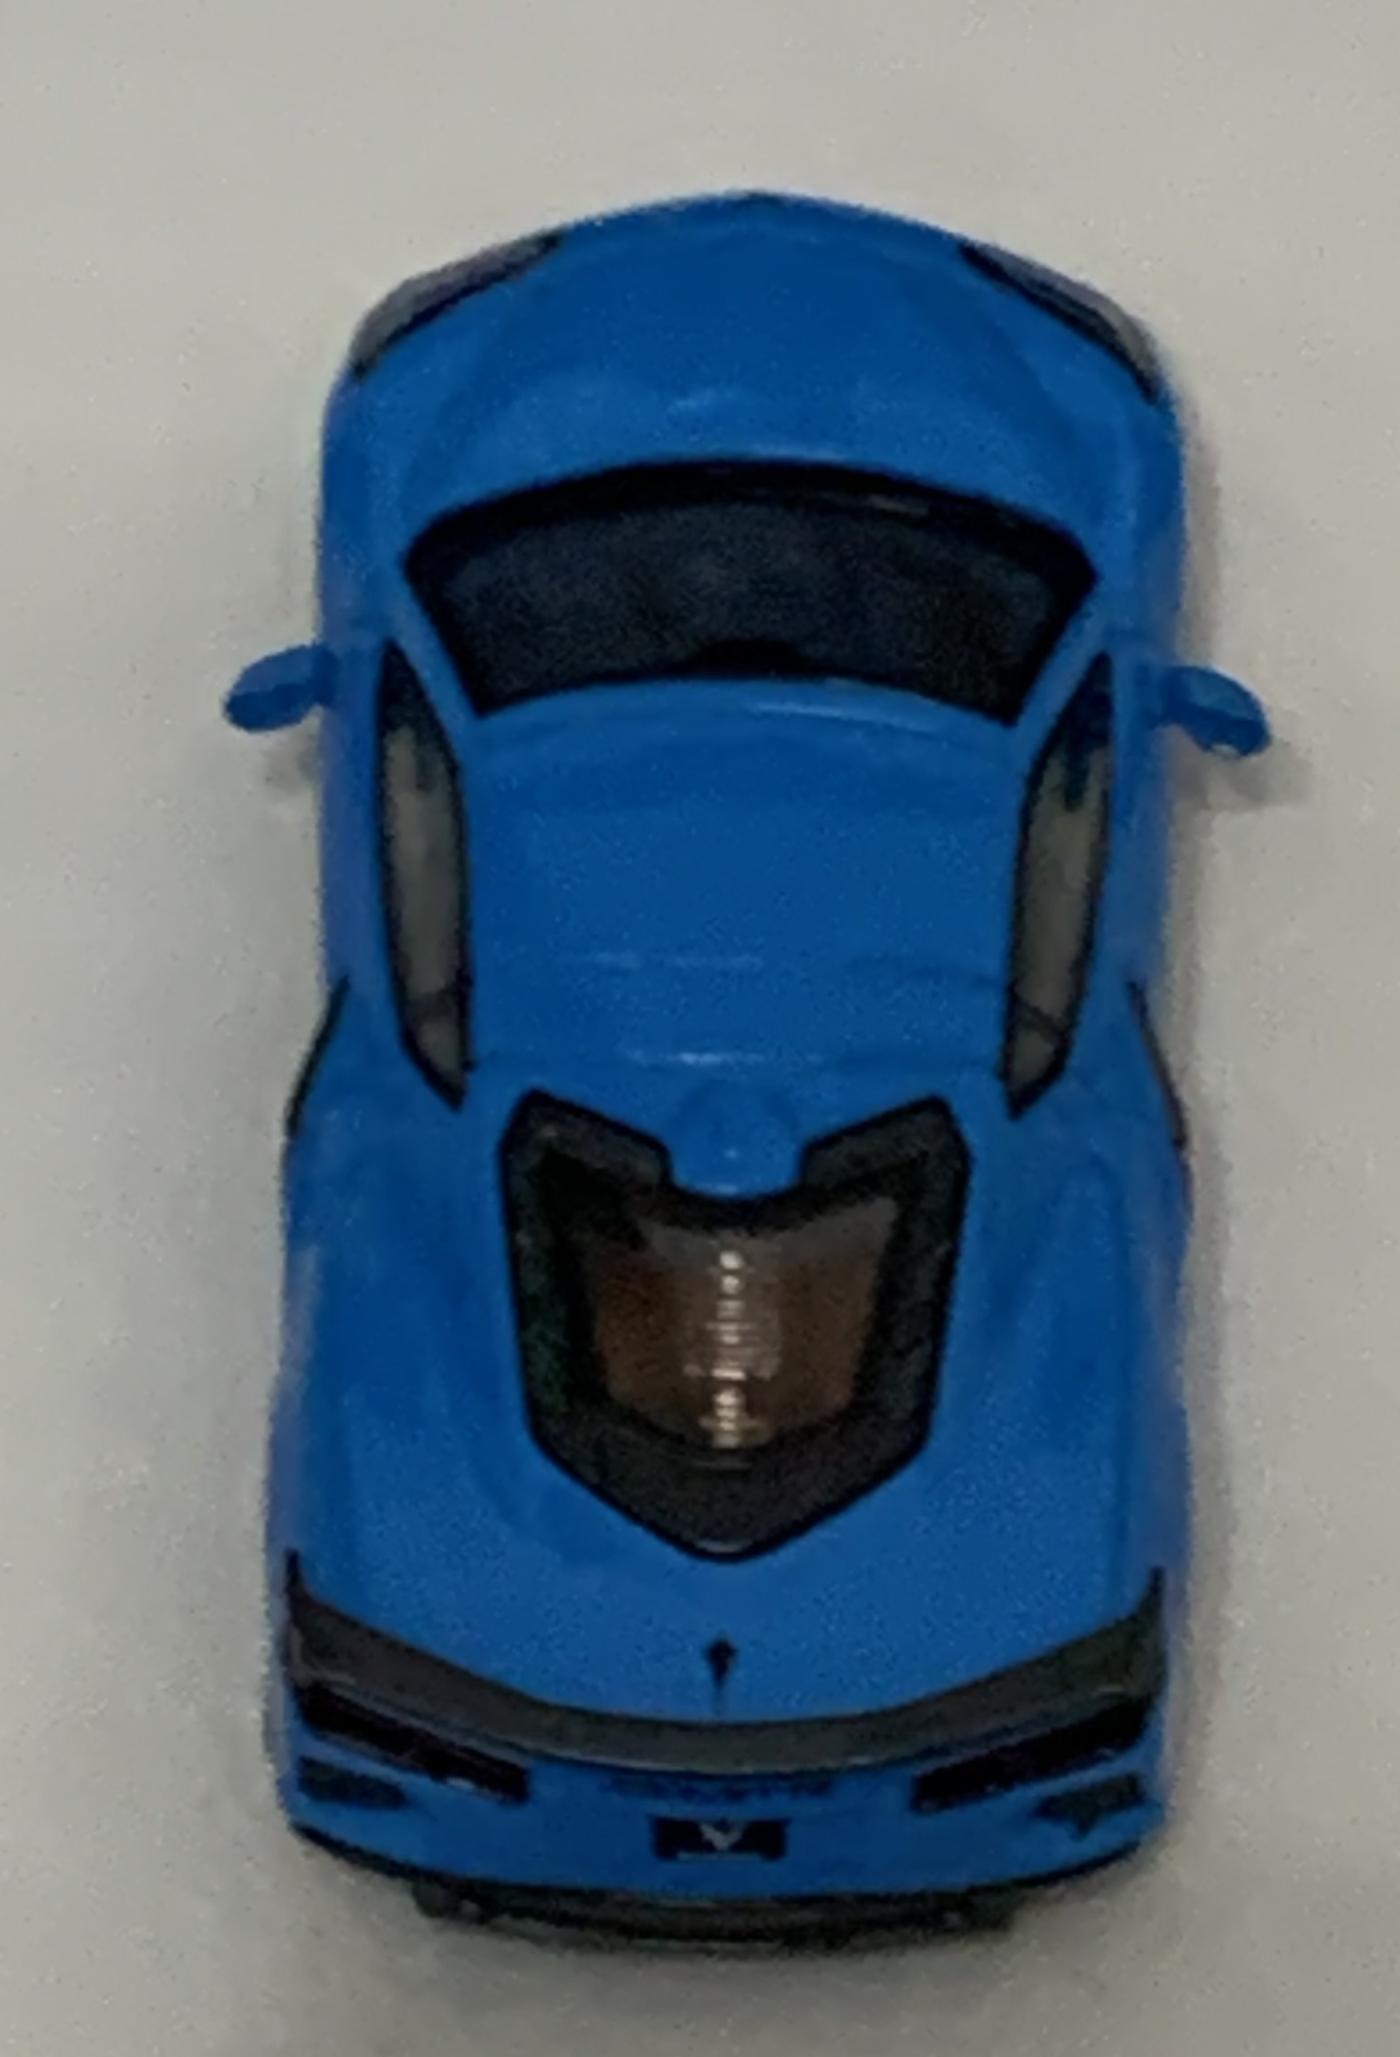 A good reproduction of the Chevrolet Corvette with detail throughout, all authentically recreated.  The model is presented in a box, the car is approx. 7 cm long and the box is 10 cm long